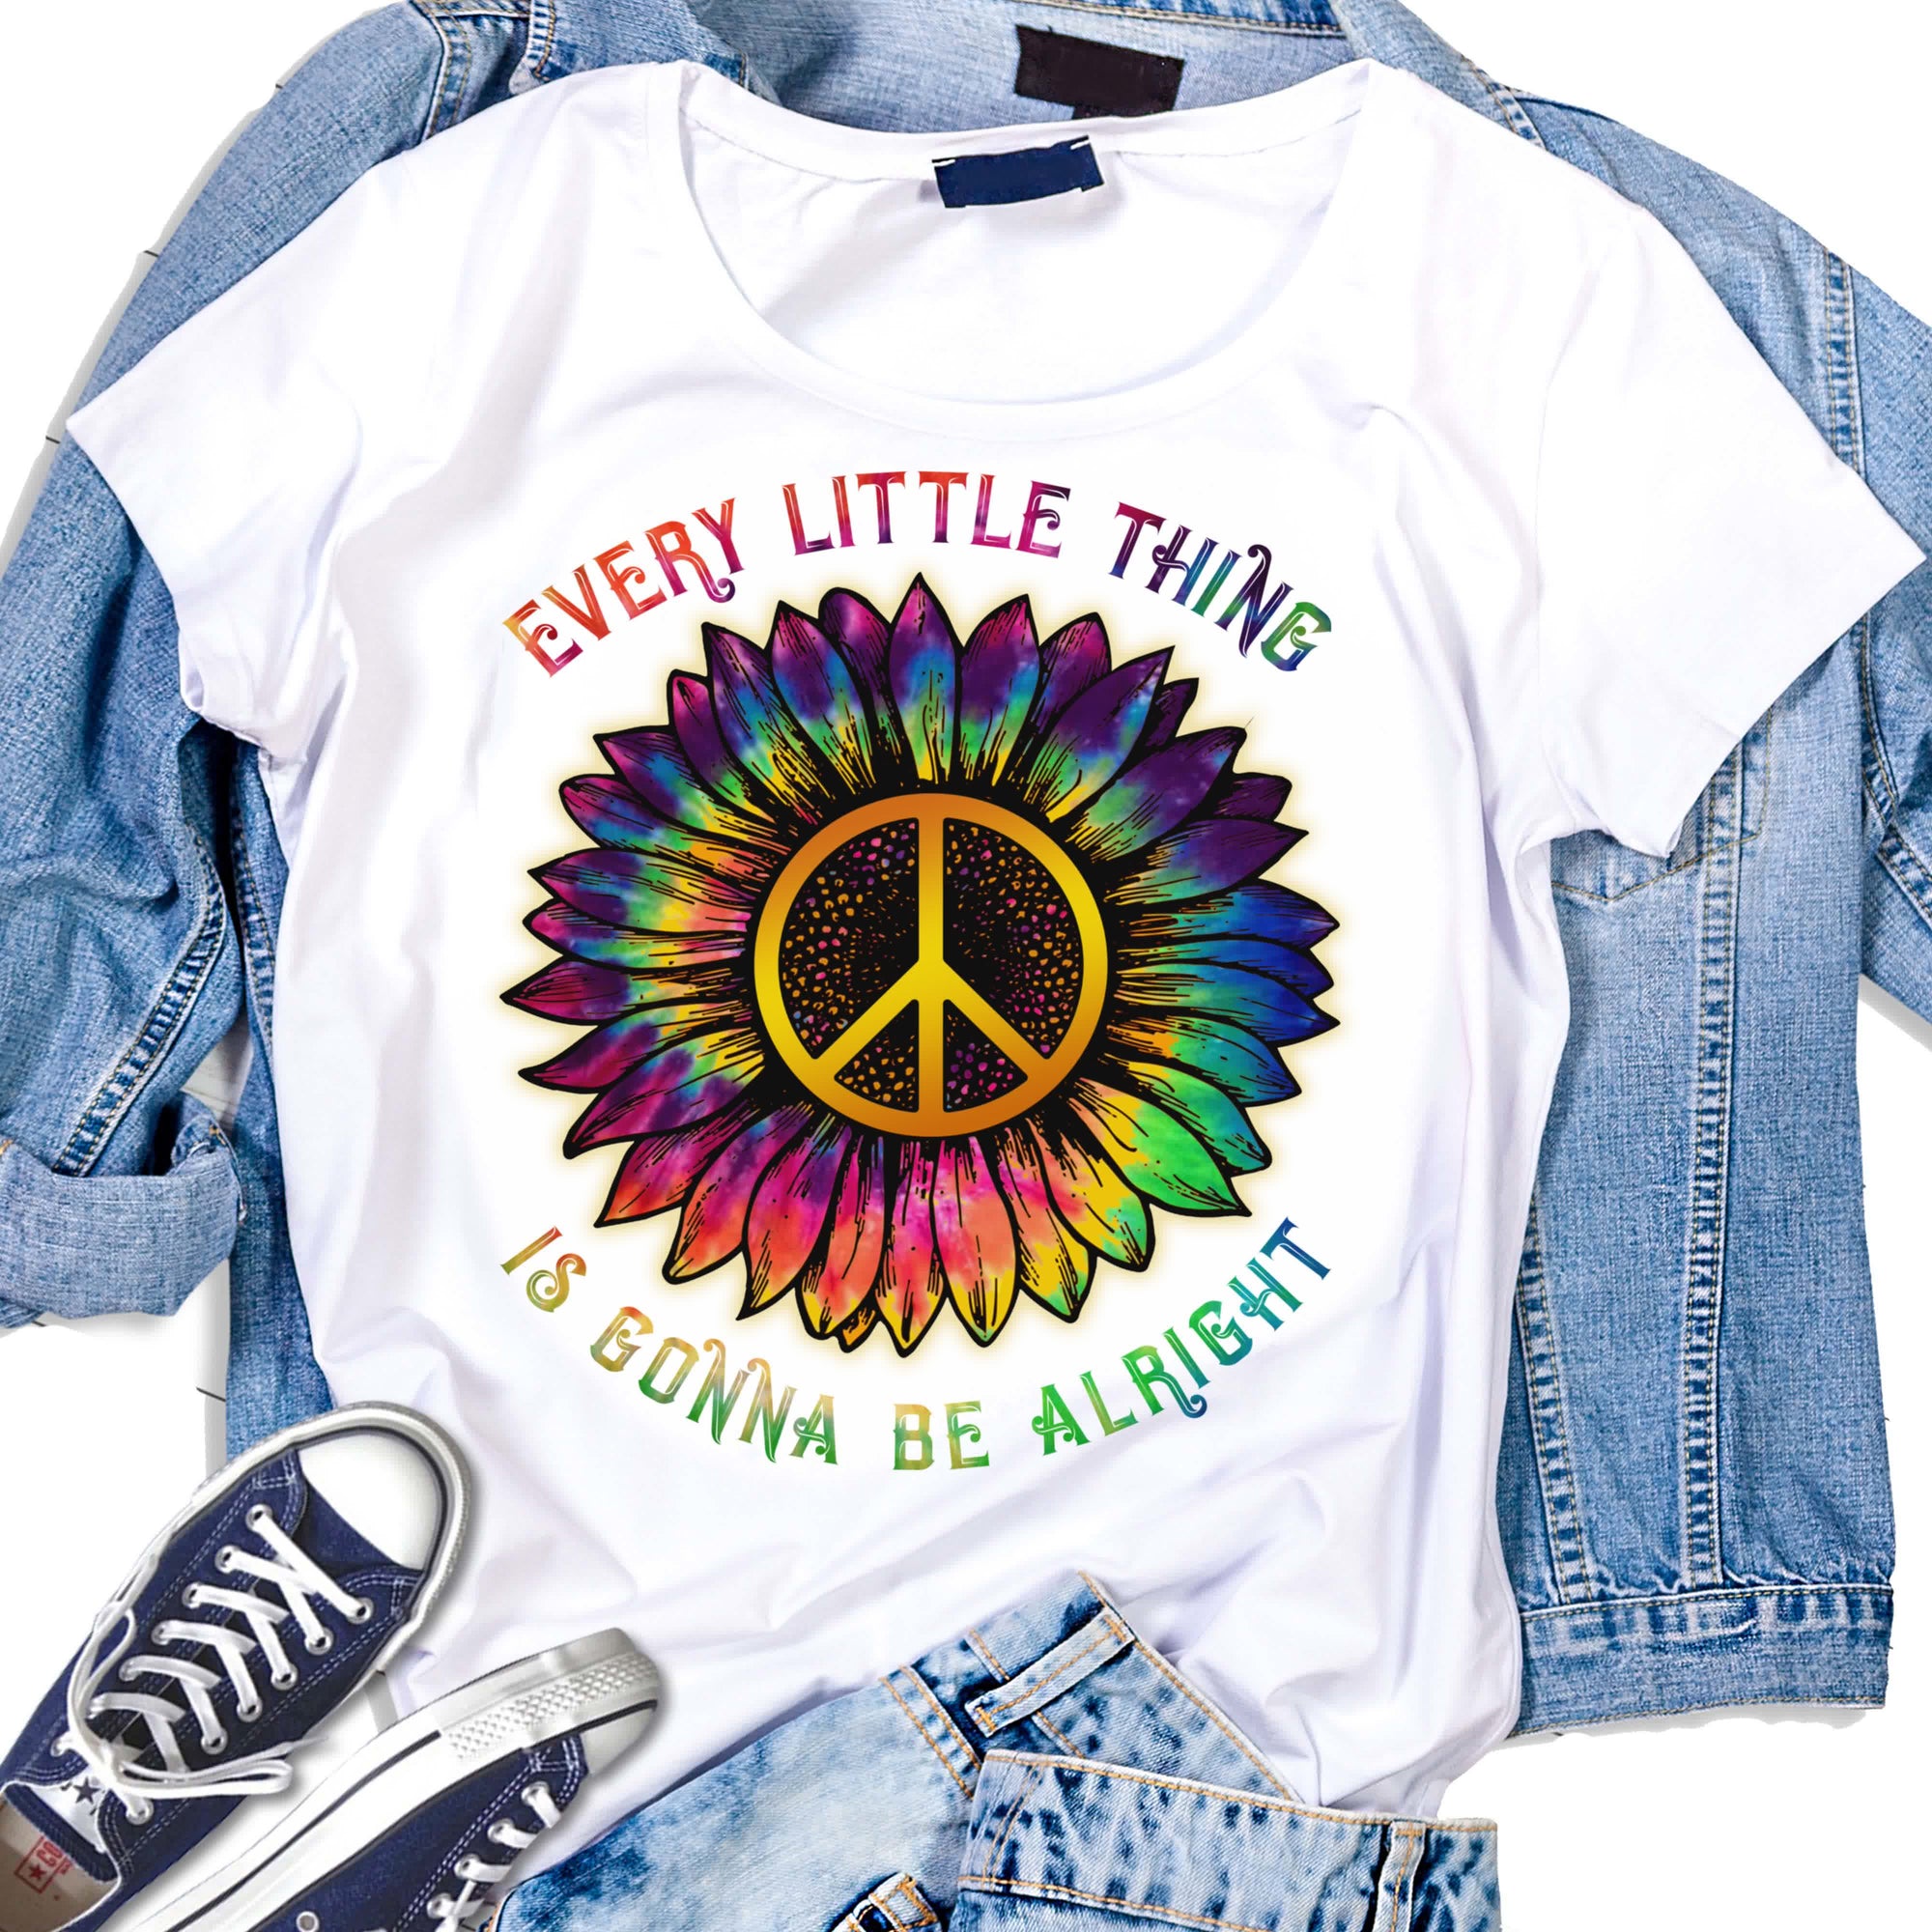 Every Little Thing Is Gonna Be Alright Sunflower Hippie Peace Shirt